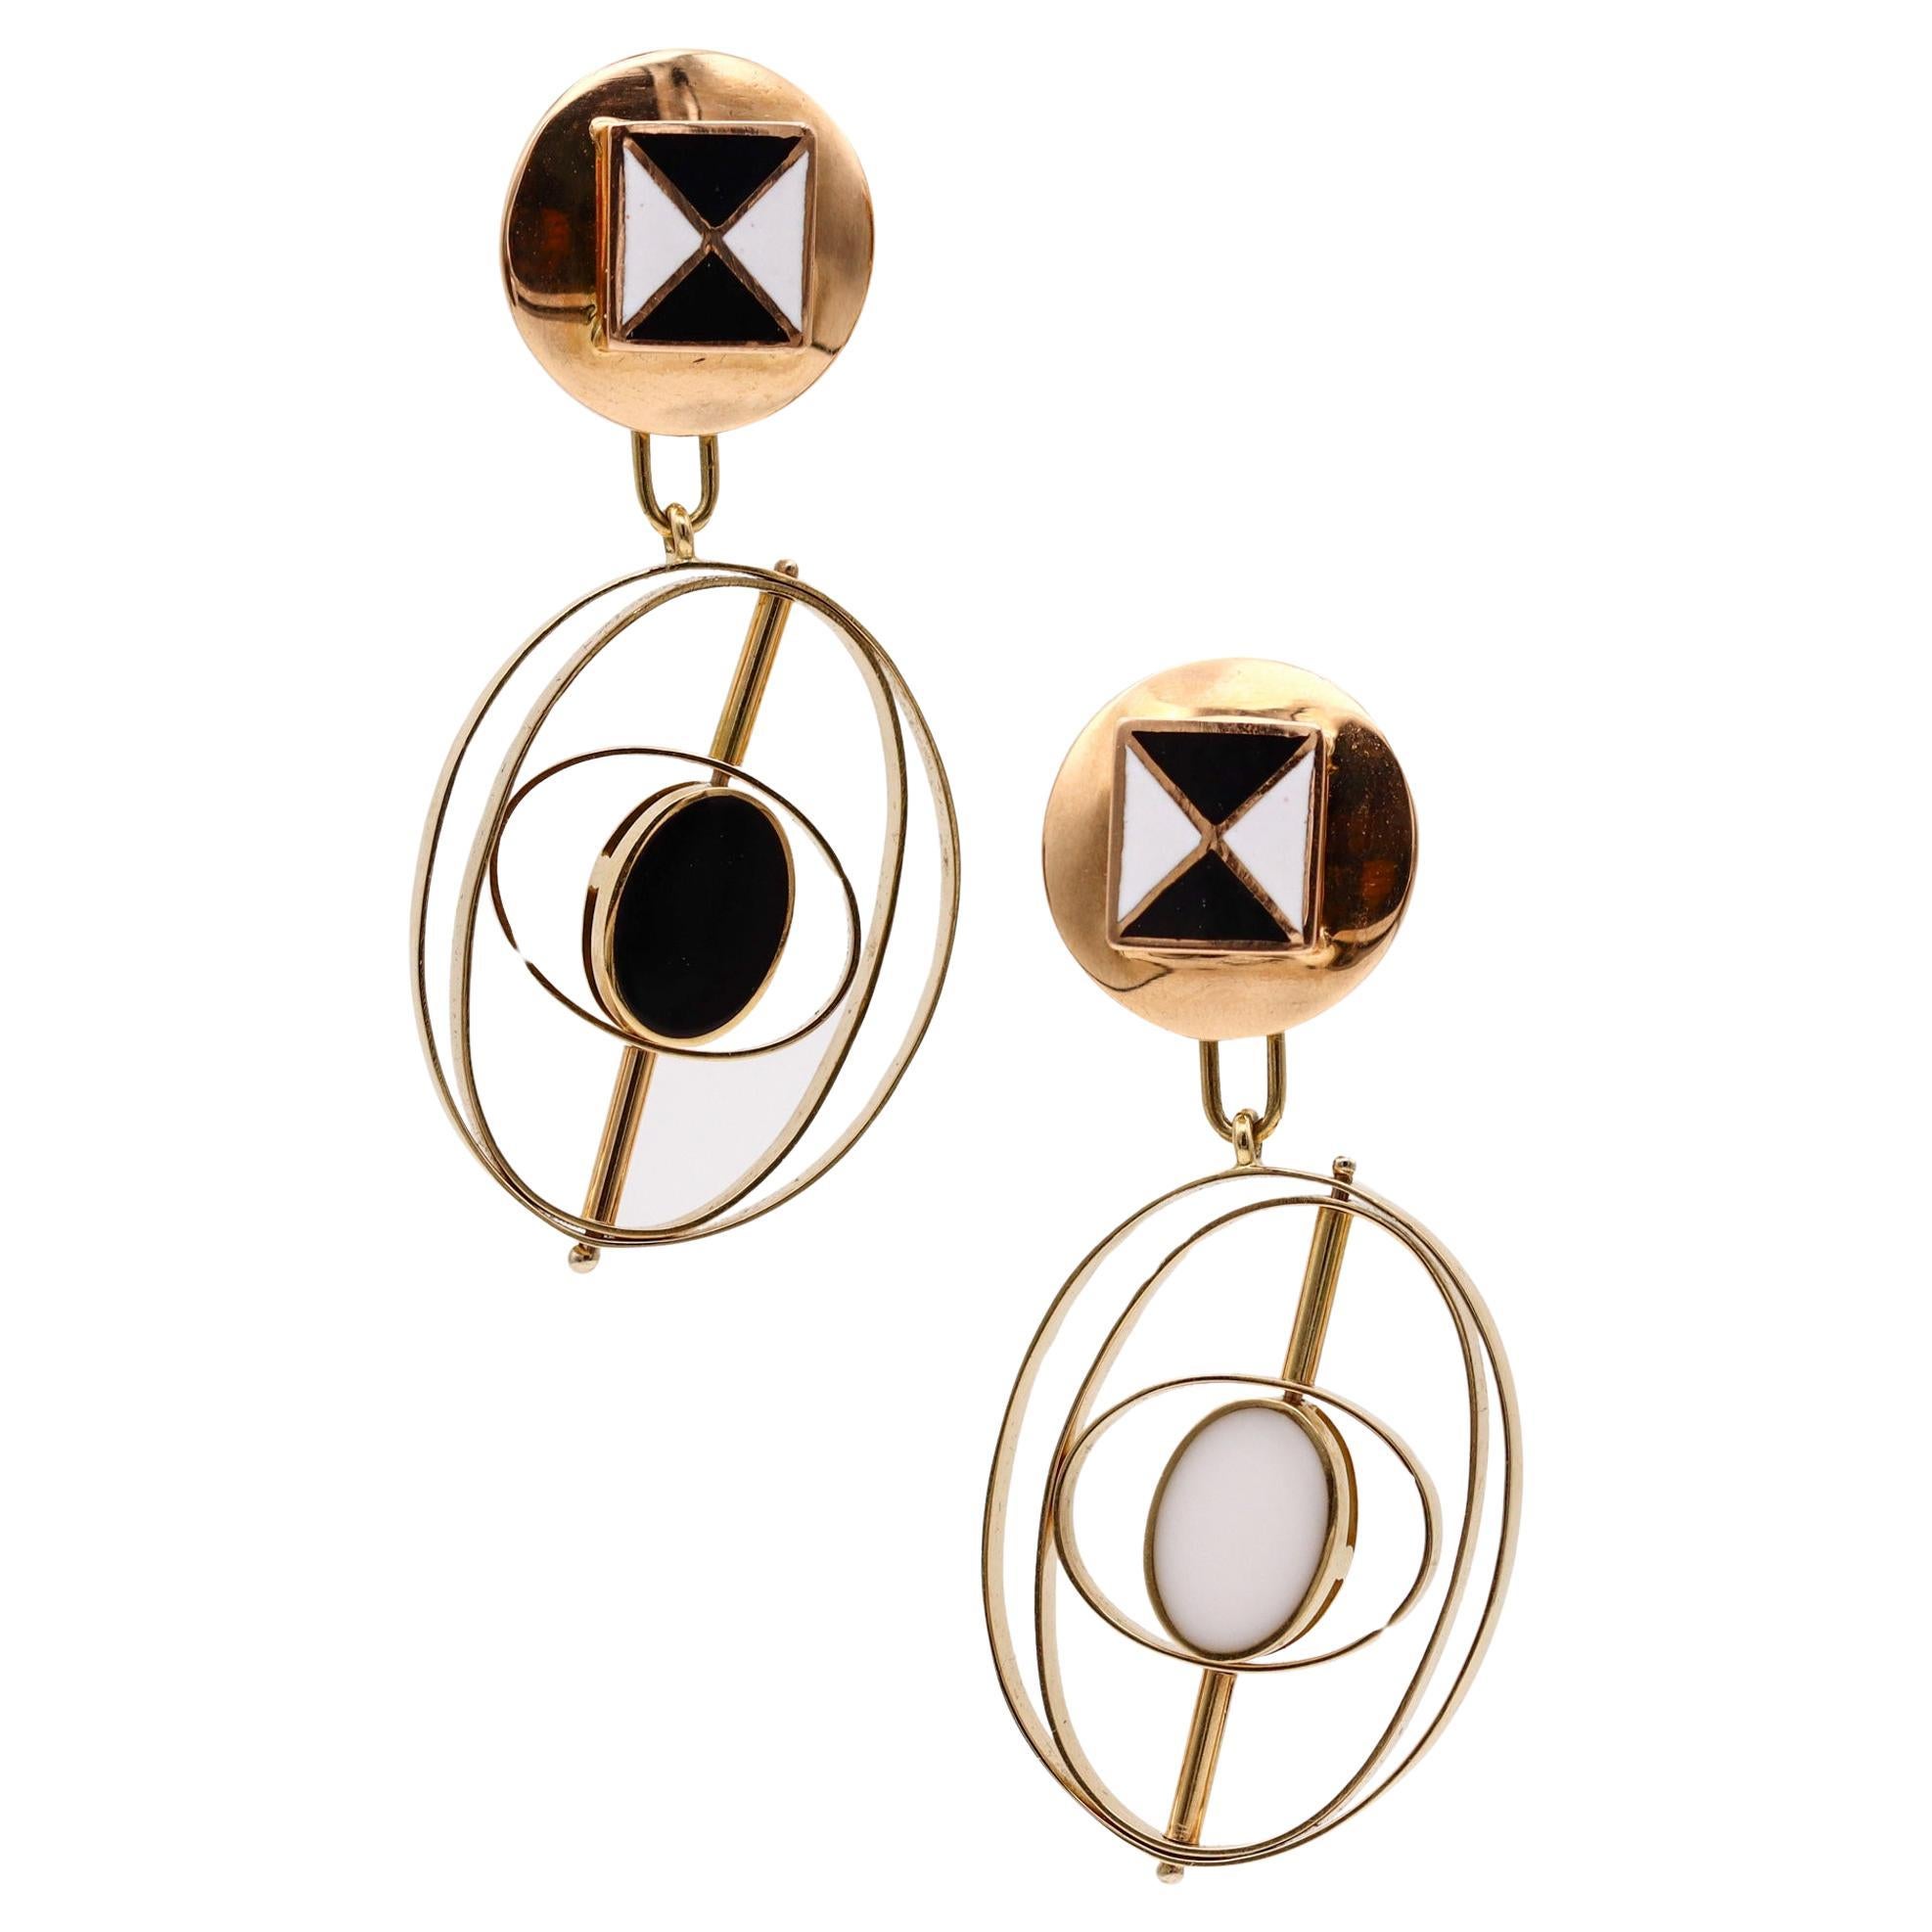 Giorgio Facchini Sculptural Kinetic Convertible earrings In 18Kt Yellow Gold